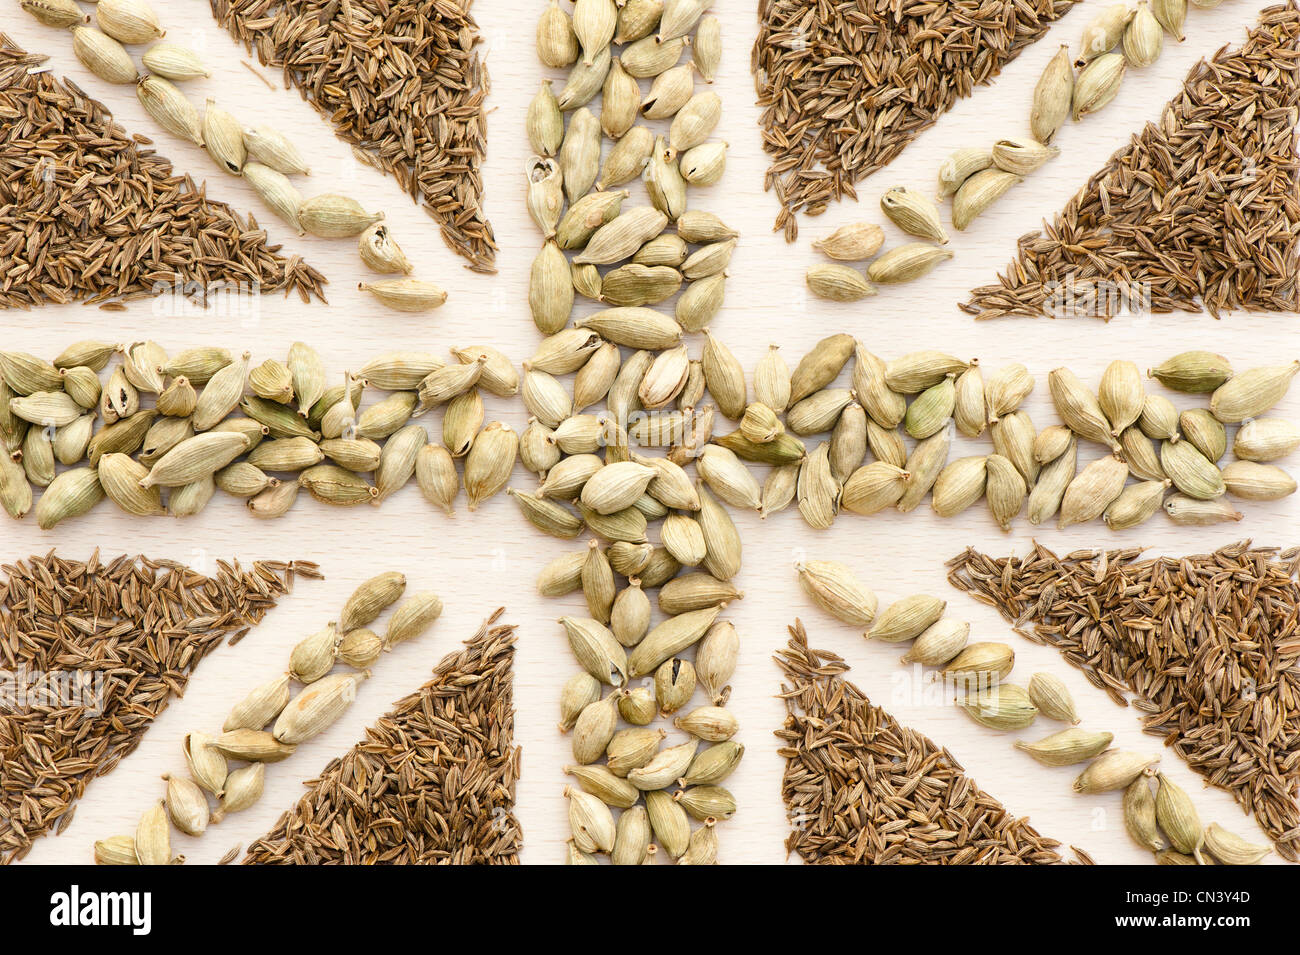 Union Flag created out of curry spices: whole cumin seeds and cardamom pods Stock Photo